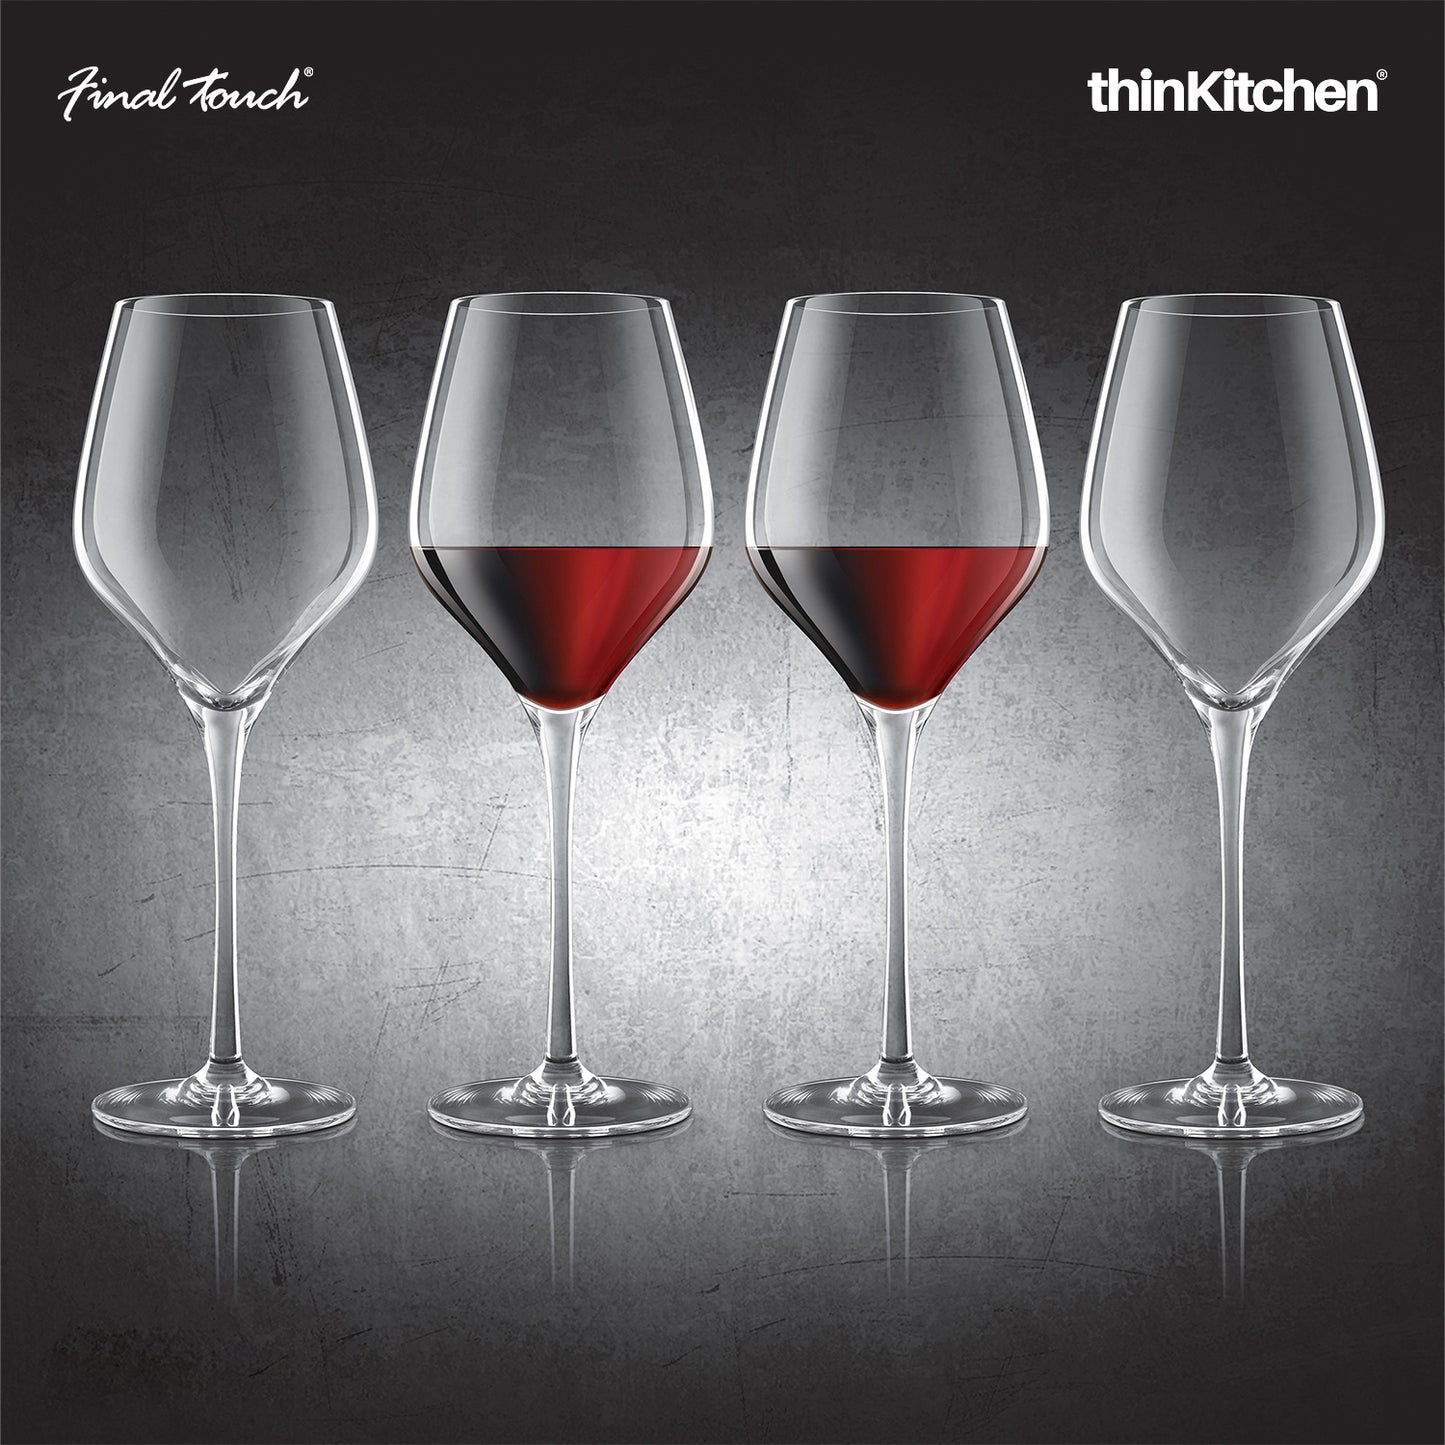 Final Touch Red Wine Lead Free Crystal Glasses Set Of 4